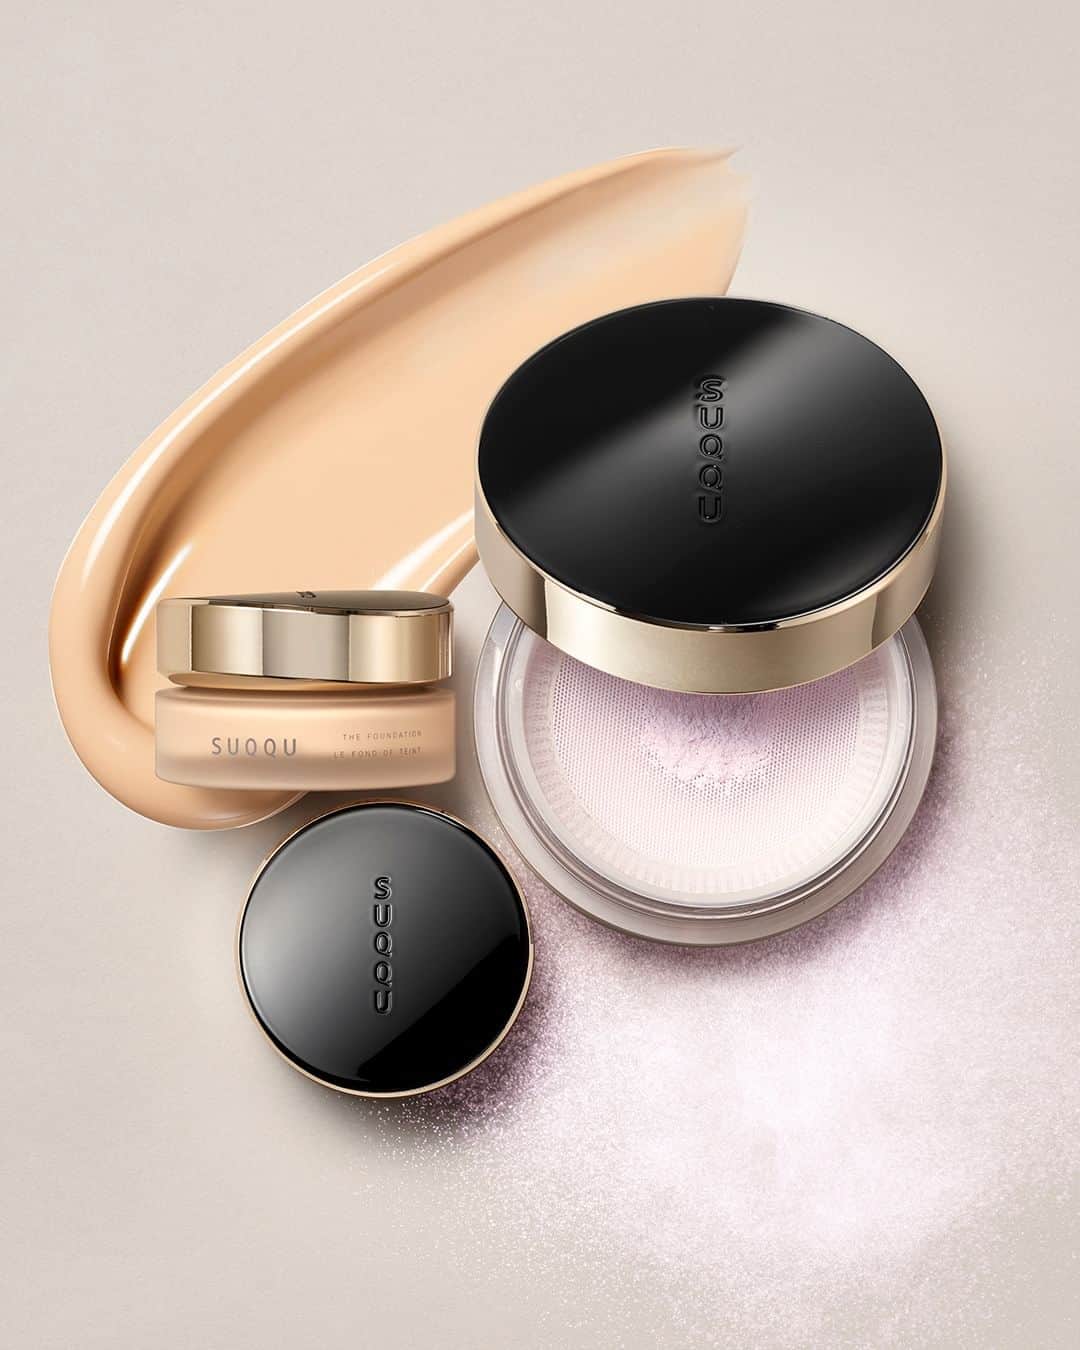 SUQQU公式Instgramアカウントのインスタグラム：「This rich cream is dense and rich yet does not create an overly made-up impression. Over time, its unique properties always leave the skin looking exquisite.  Together with the newly created feather-like finishing powder, a foundation that lays the groundwork for cosmetic beauty has been perfected.  THE FOUNDATION THE LOOSE POWDER  濃密でリッチ、なのに行き過ぎた化粧感は、感じさせない。 こっくりとしたクリームならではの技を生かしながら、移り変わる時とともに、いつでも端正な肌へ。羽衣のようなフィニッシュ パウダーとあわせて、化粧美の礎を築くベースメイクに。  ザ ファンデーション ザ ルース パウダー  #SUQQU #スック #jbeauty #cosmetics #SUQQU20th #SUQQUbasemakeup #ザファンデーション #ザルースパウダー　#basemake #foundation #powder #新商品 #newproducts」